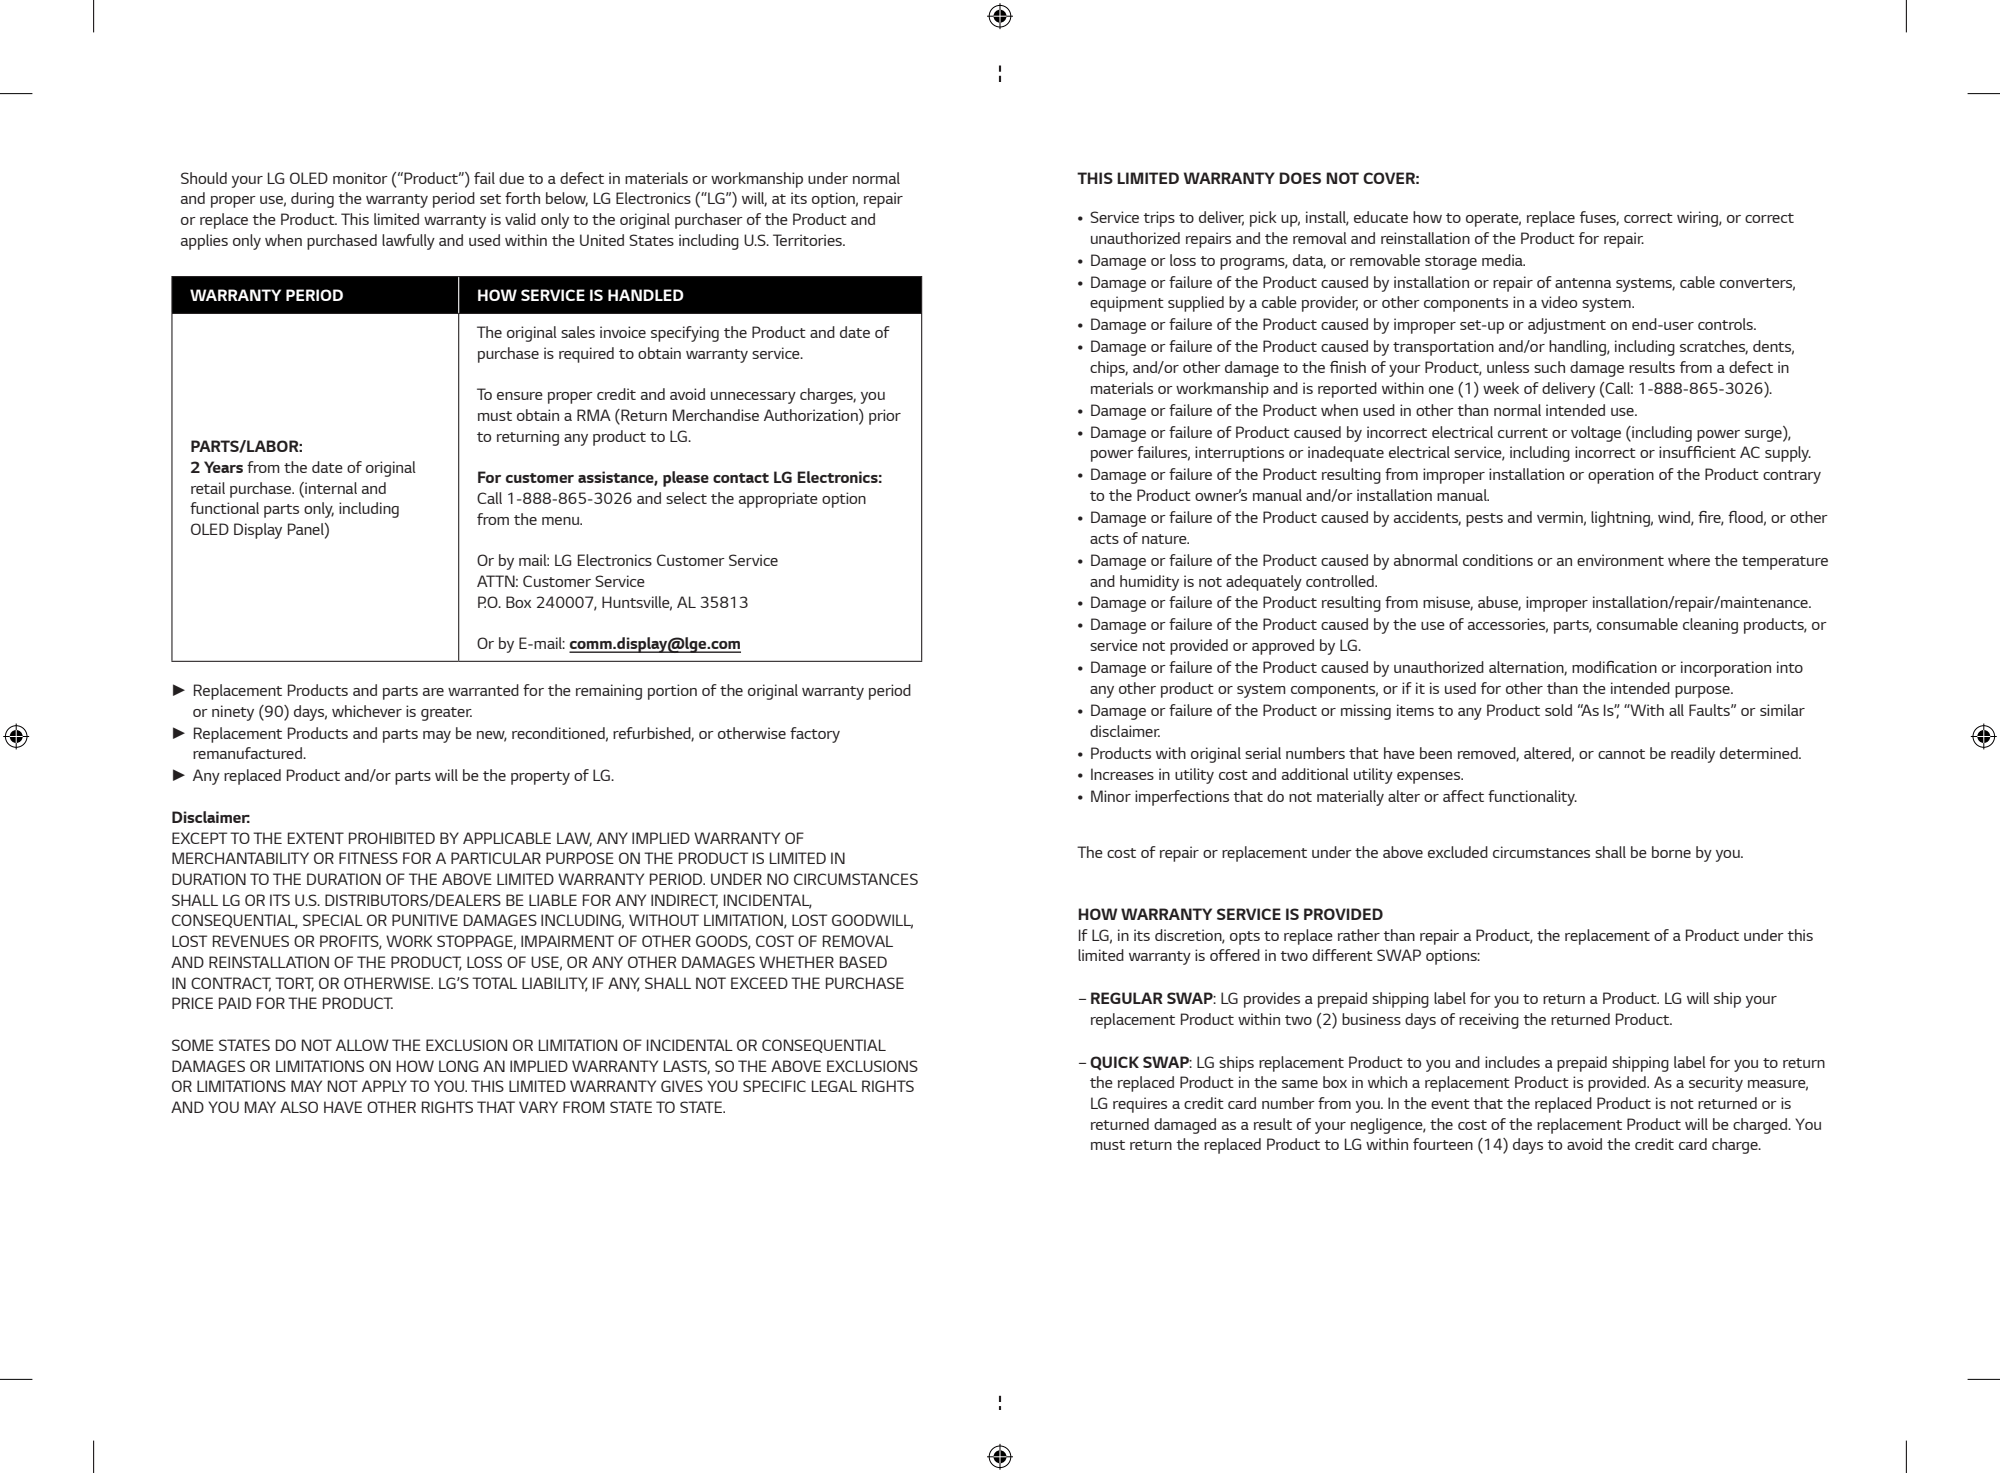 Page 2 of LG Gaming OLED Monitor Warranty